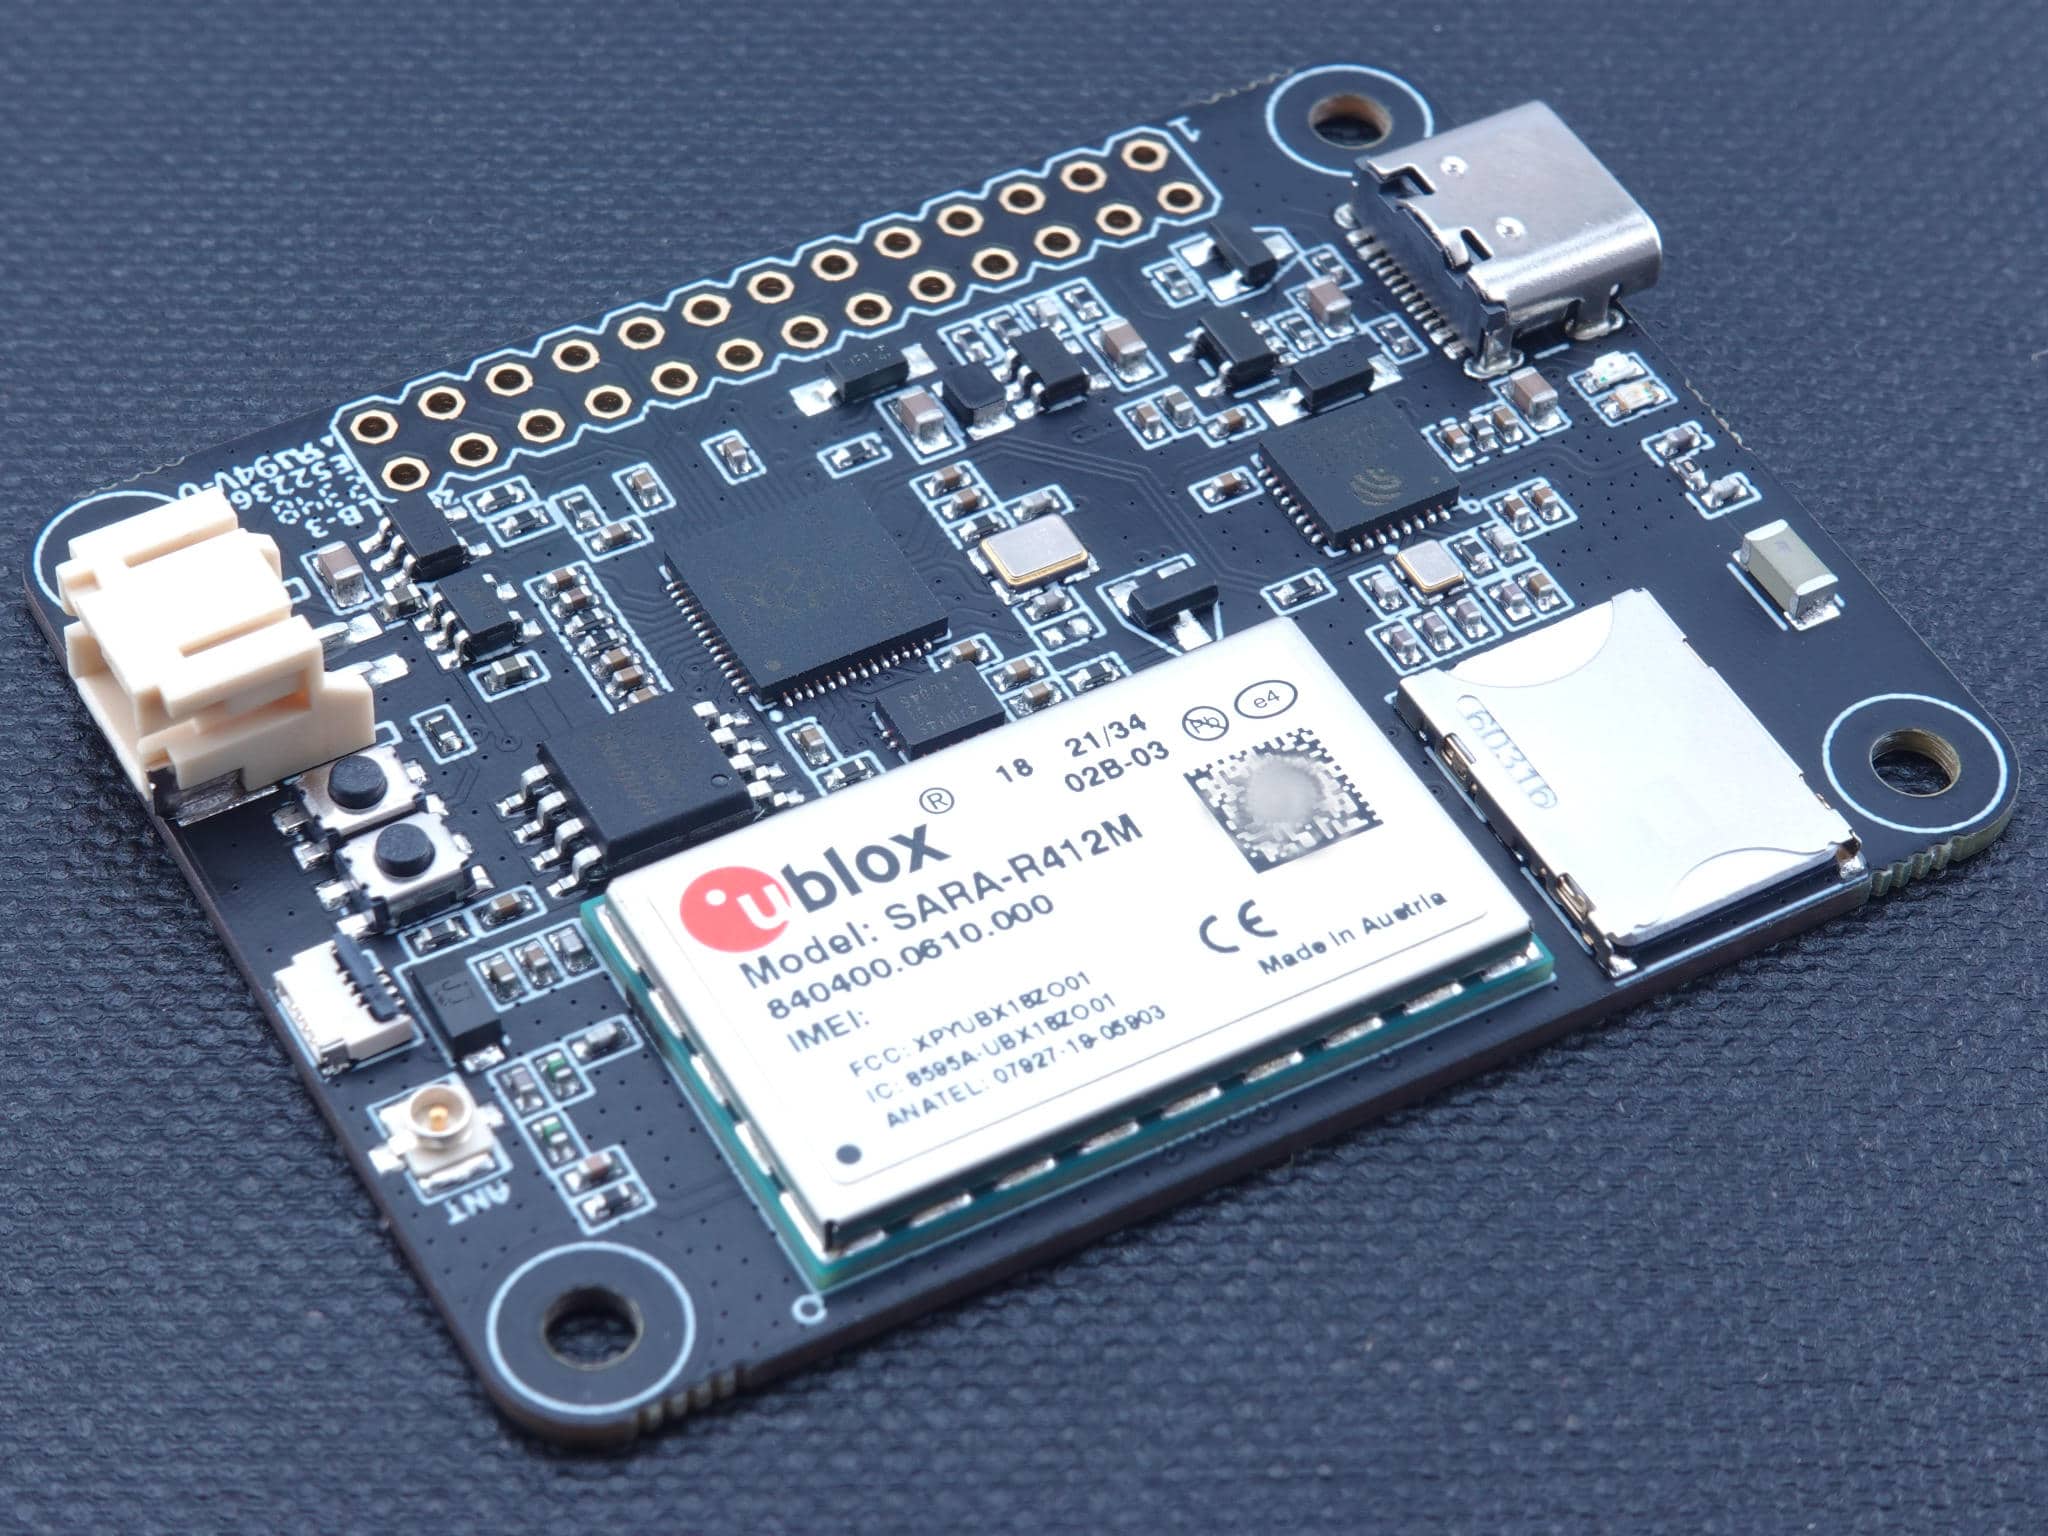 ilabs rp2040 connectivity board